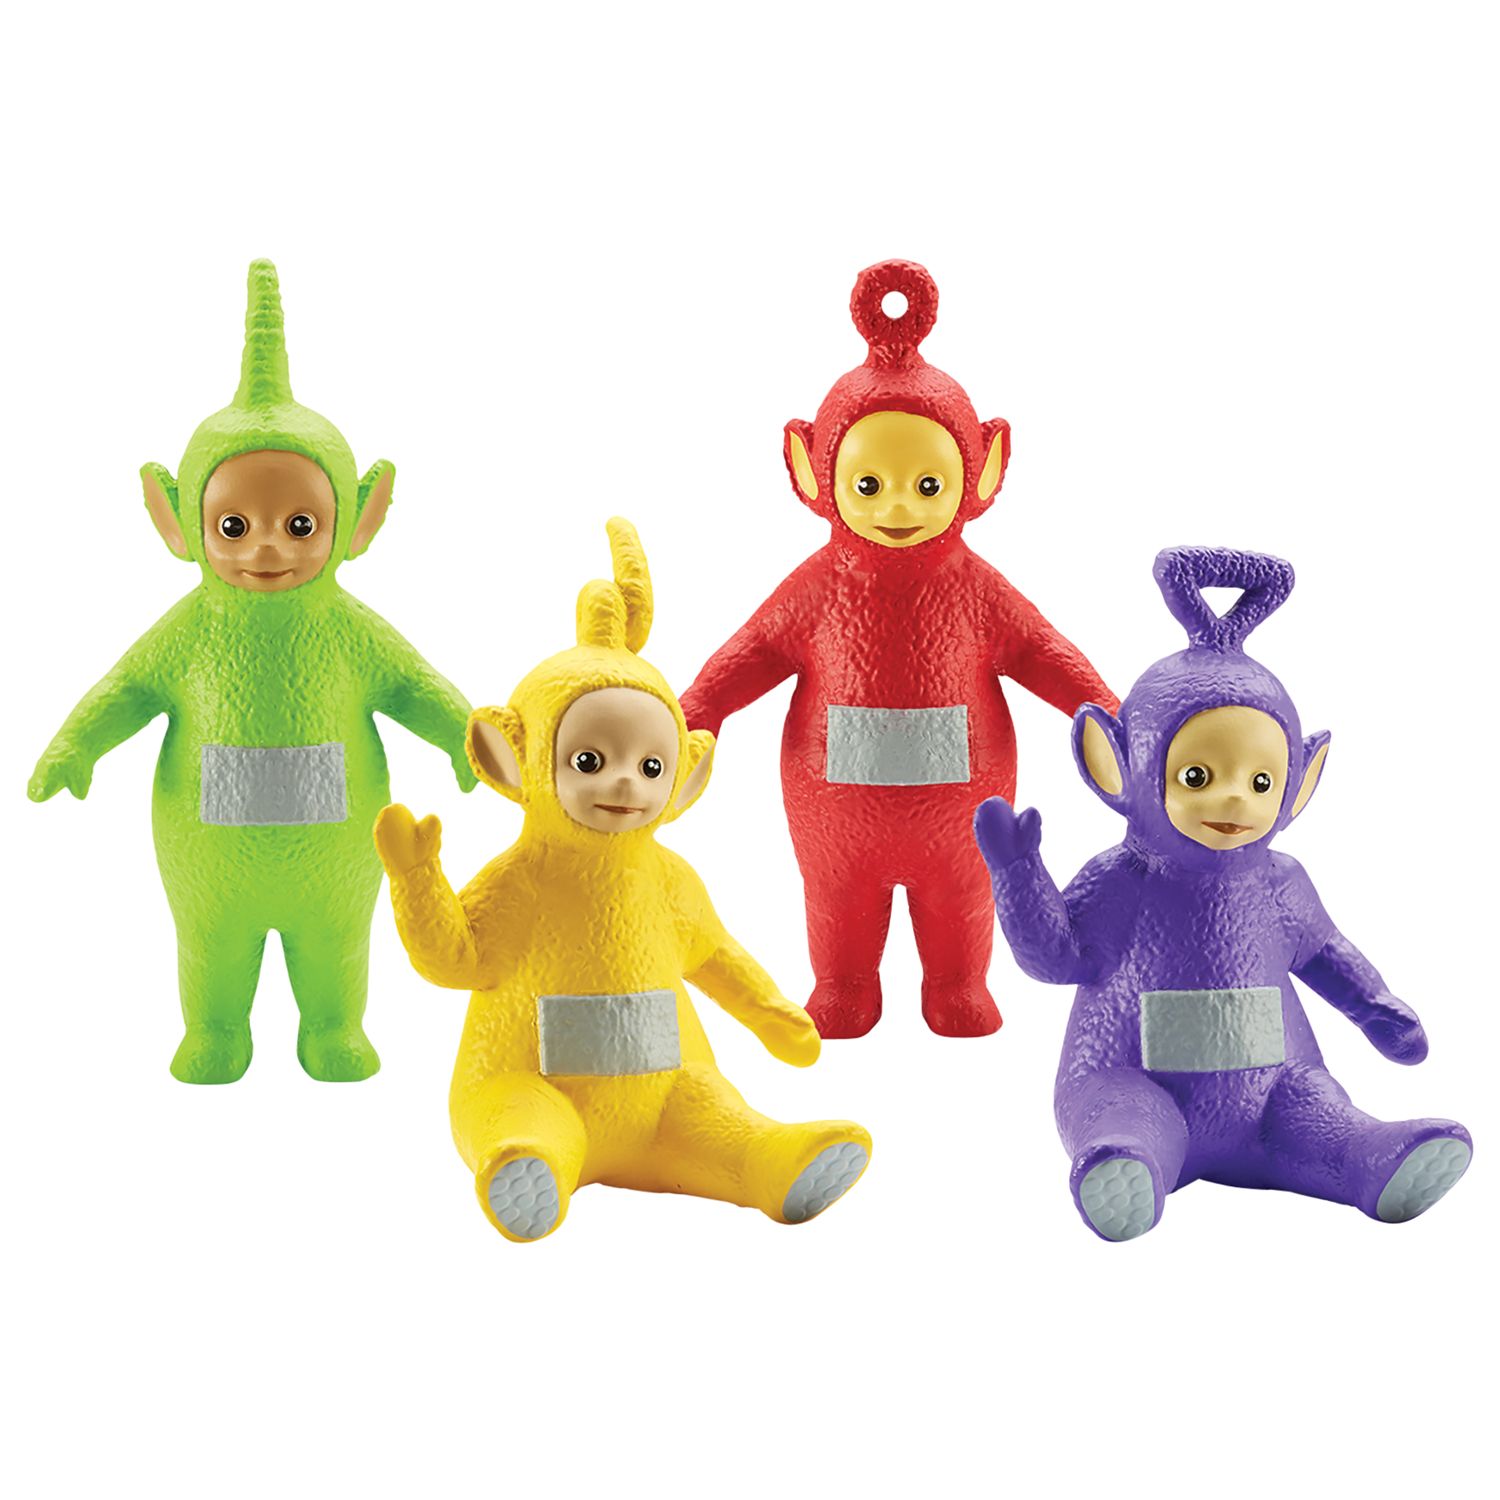 Teletubbies Family Figures, Pack of 4 